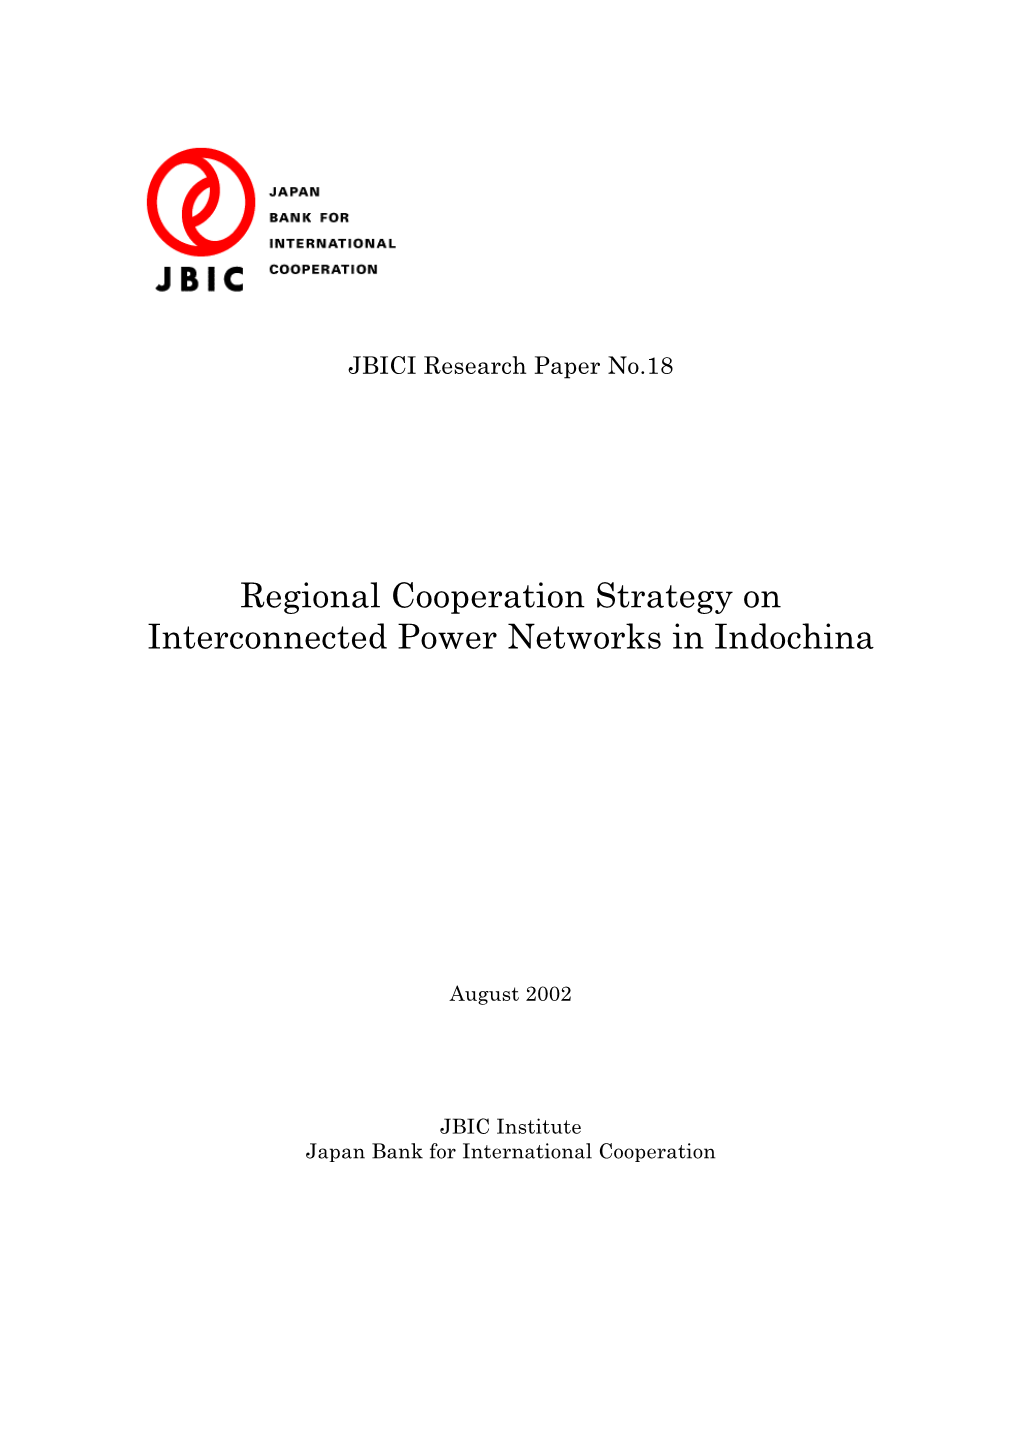 Regional Cooperation Strategy on Interconnected Power Networks in Indochina